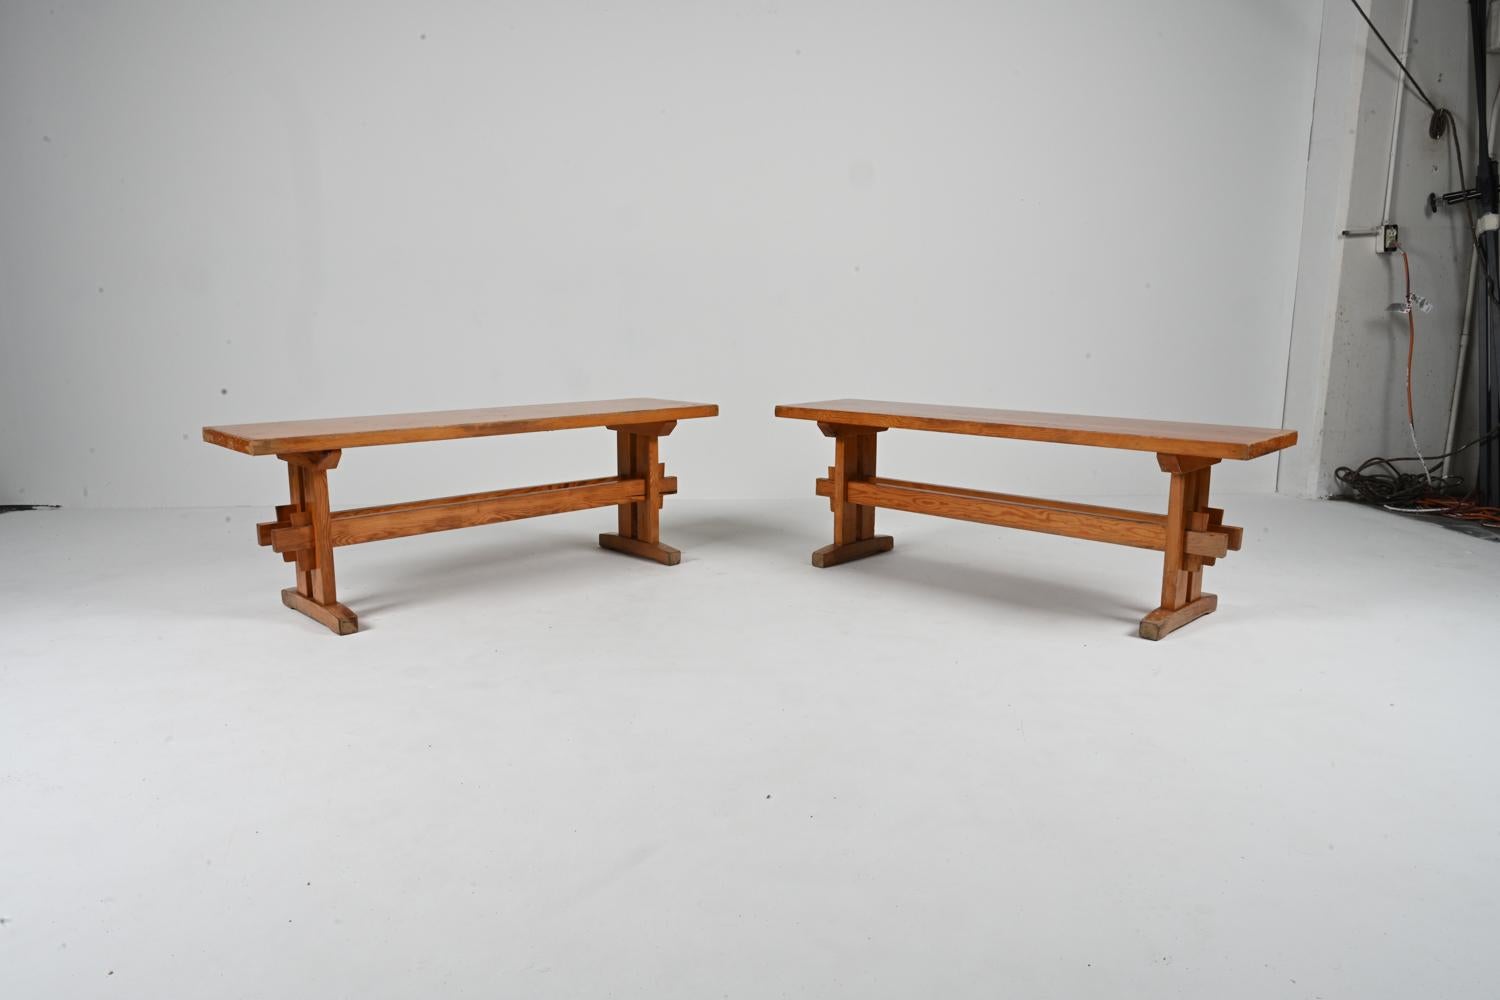 Scandinavian Modern Pair of Solid Pine Benches Attributed to Sven Larsson, c. 1970's For Sale